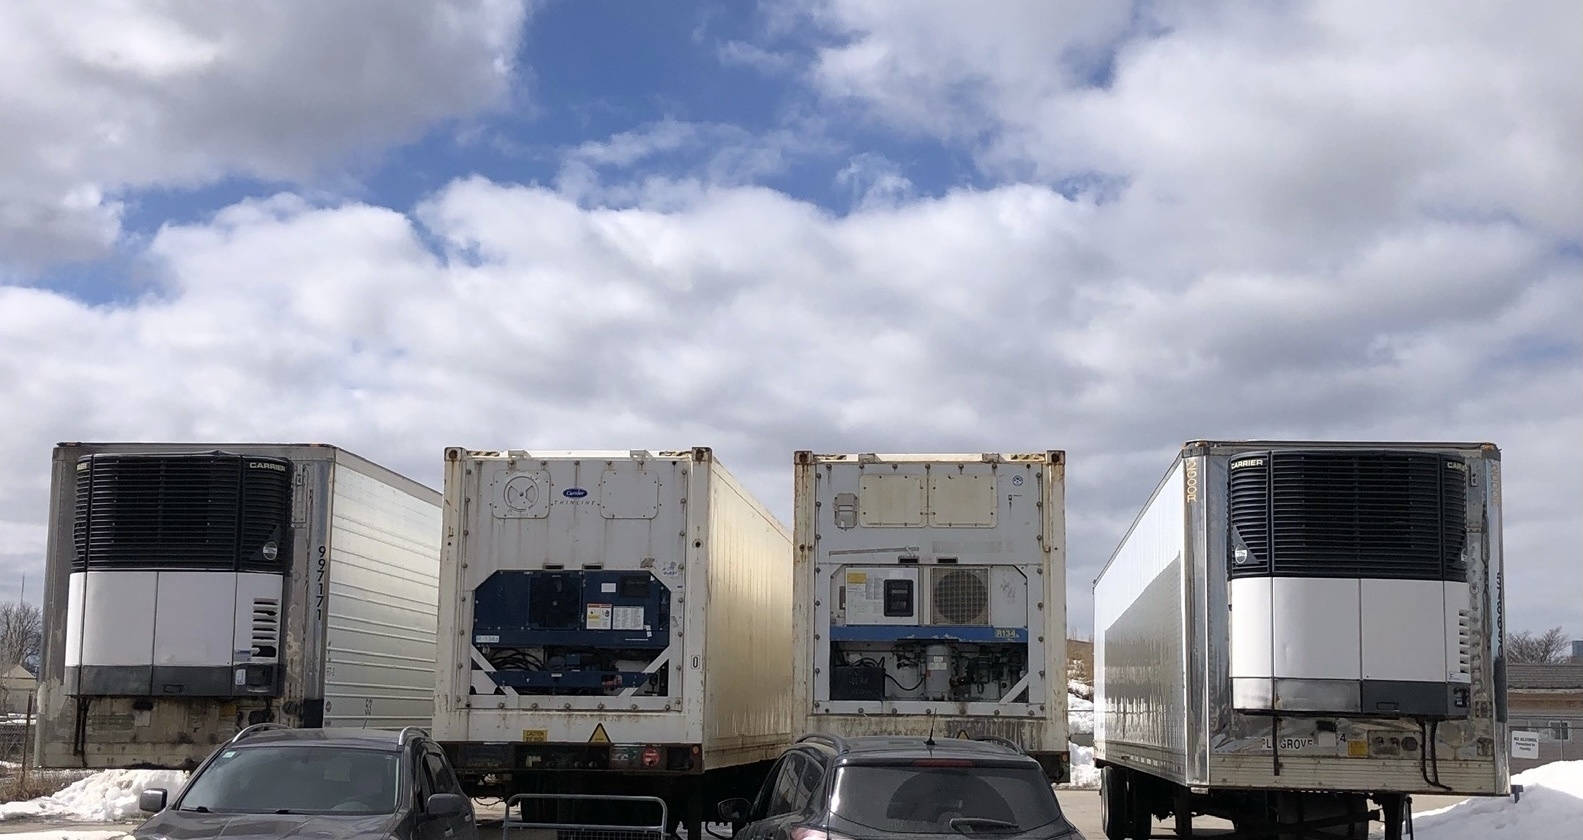 the front of four tractor trailers with refrigeration units visible. the top of two cars are also visible. the sky is clear.